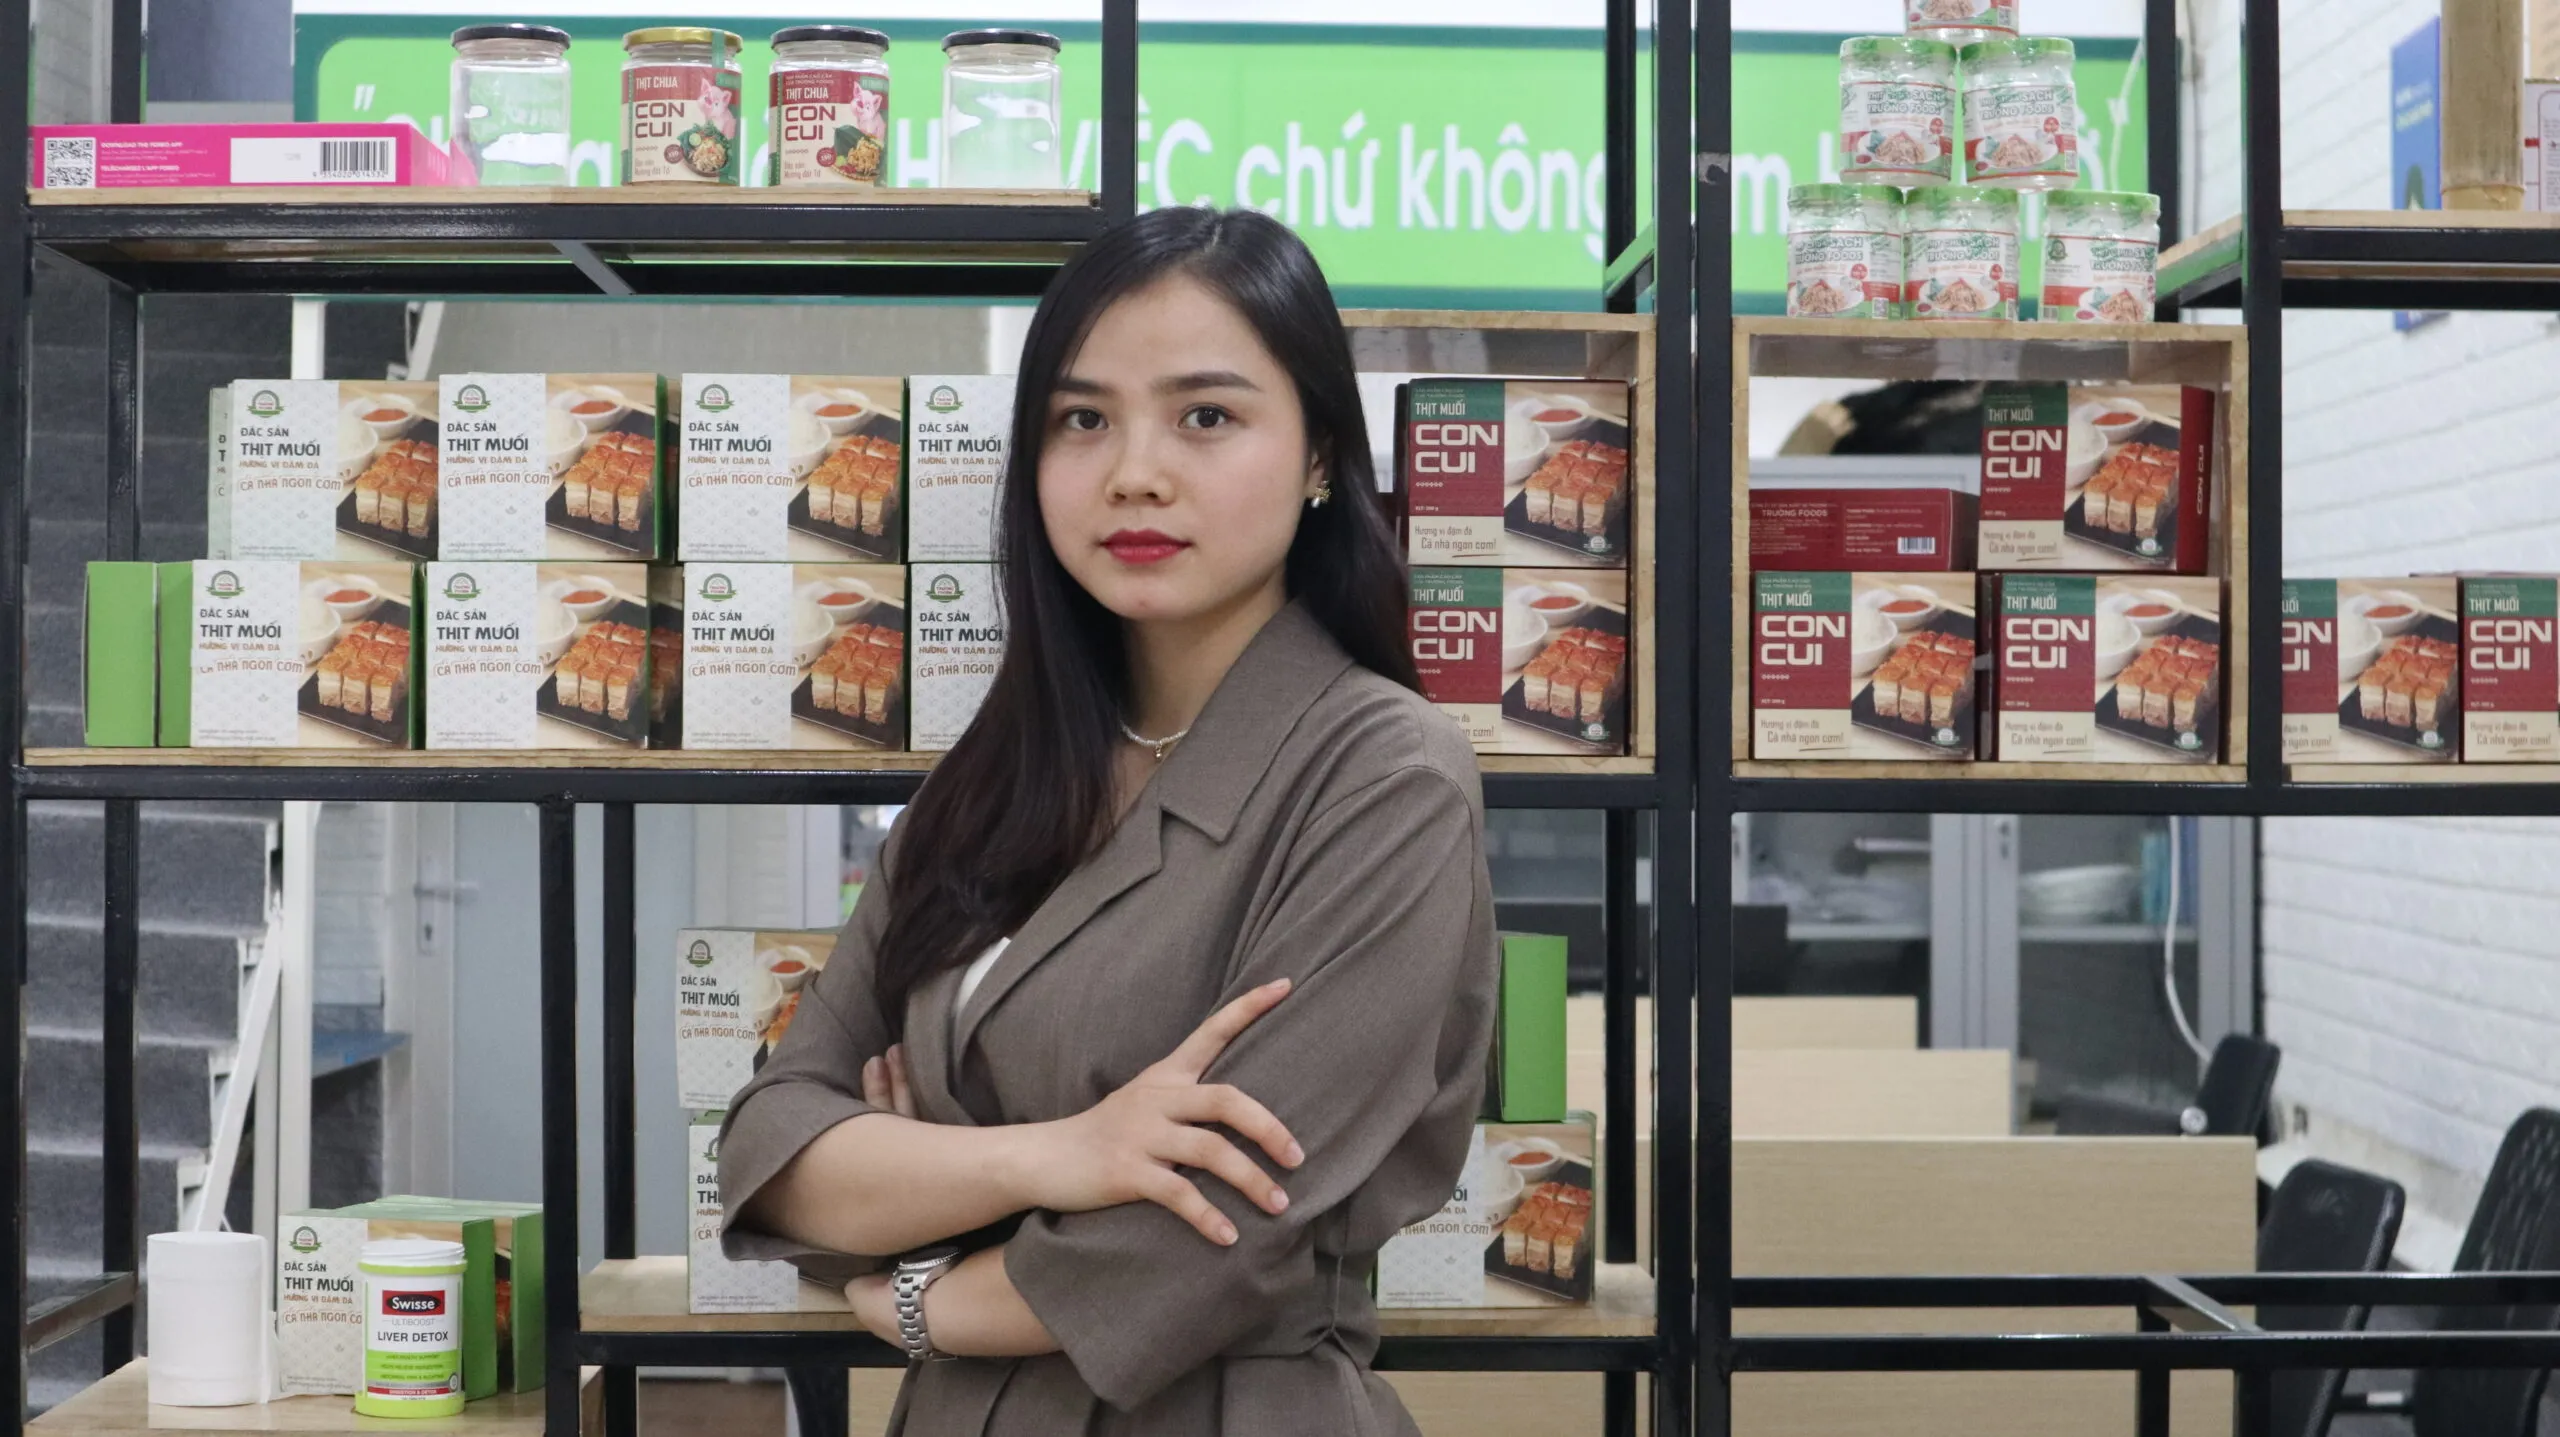 A woman stands in front of shelves stocked with food.